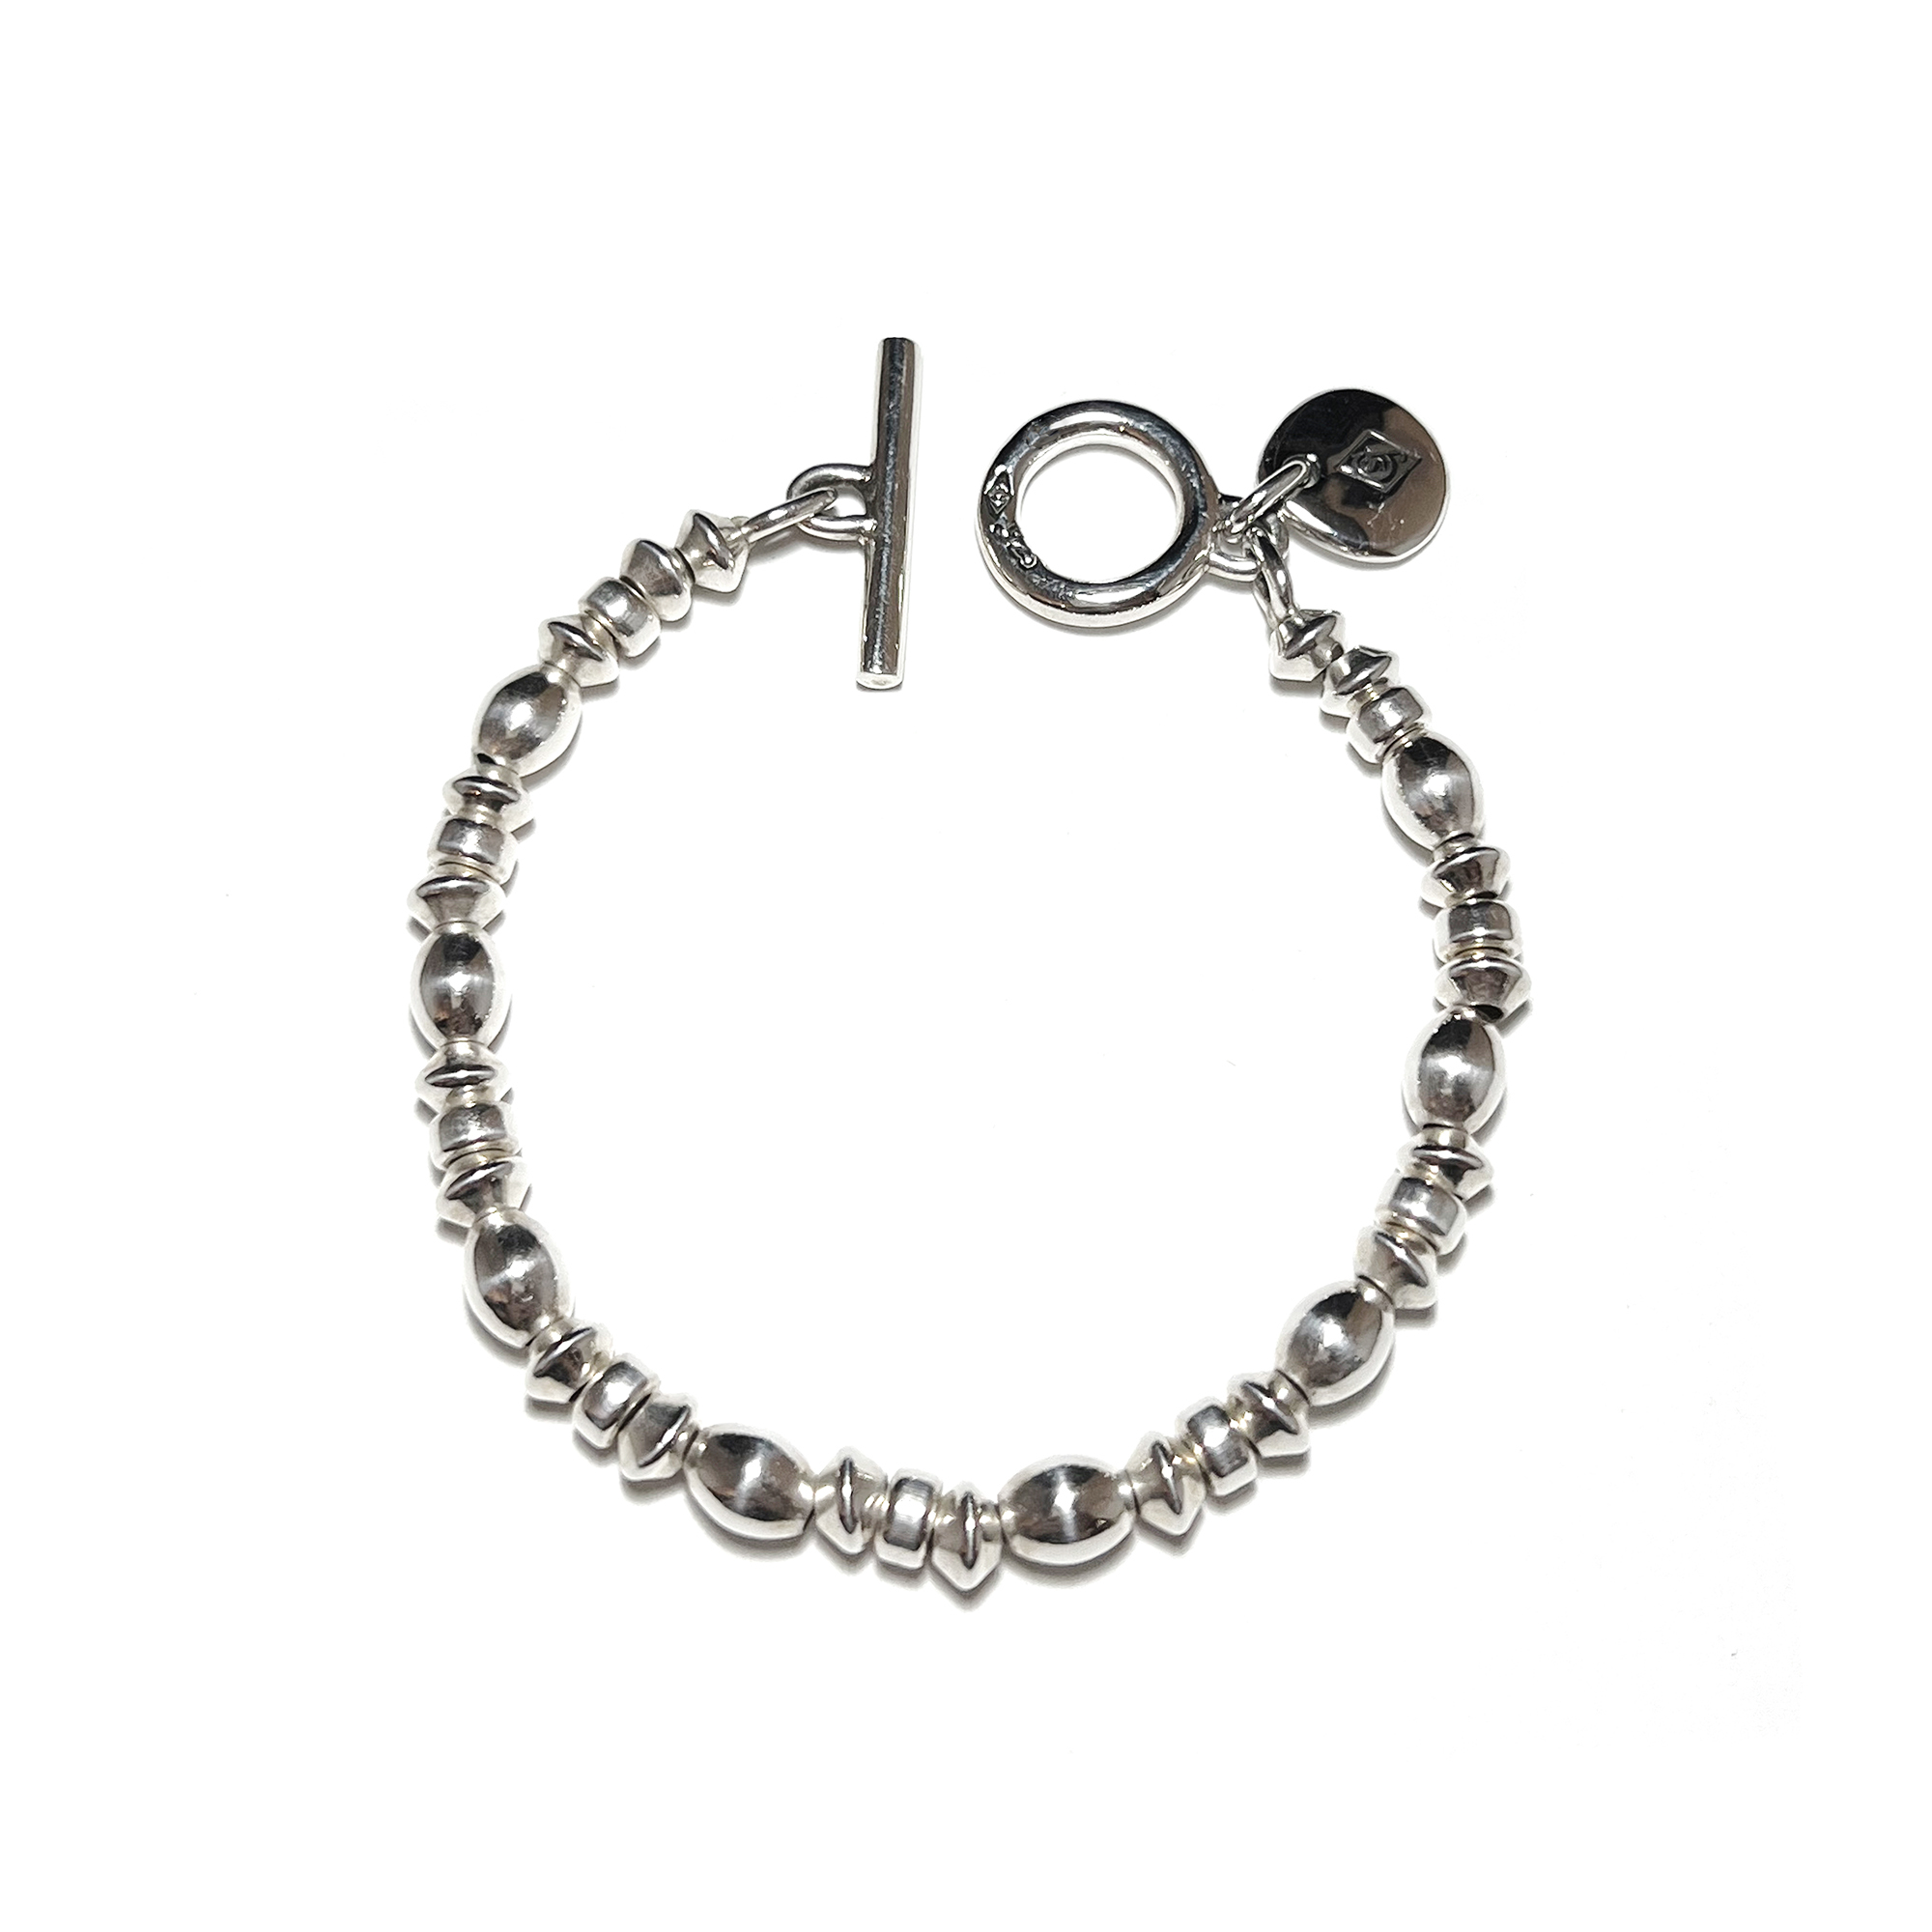 Consigliere - Steady High / Silver Beads Bracelet C